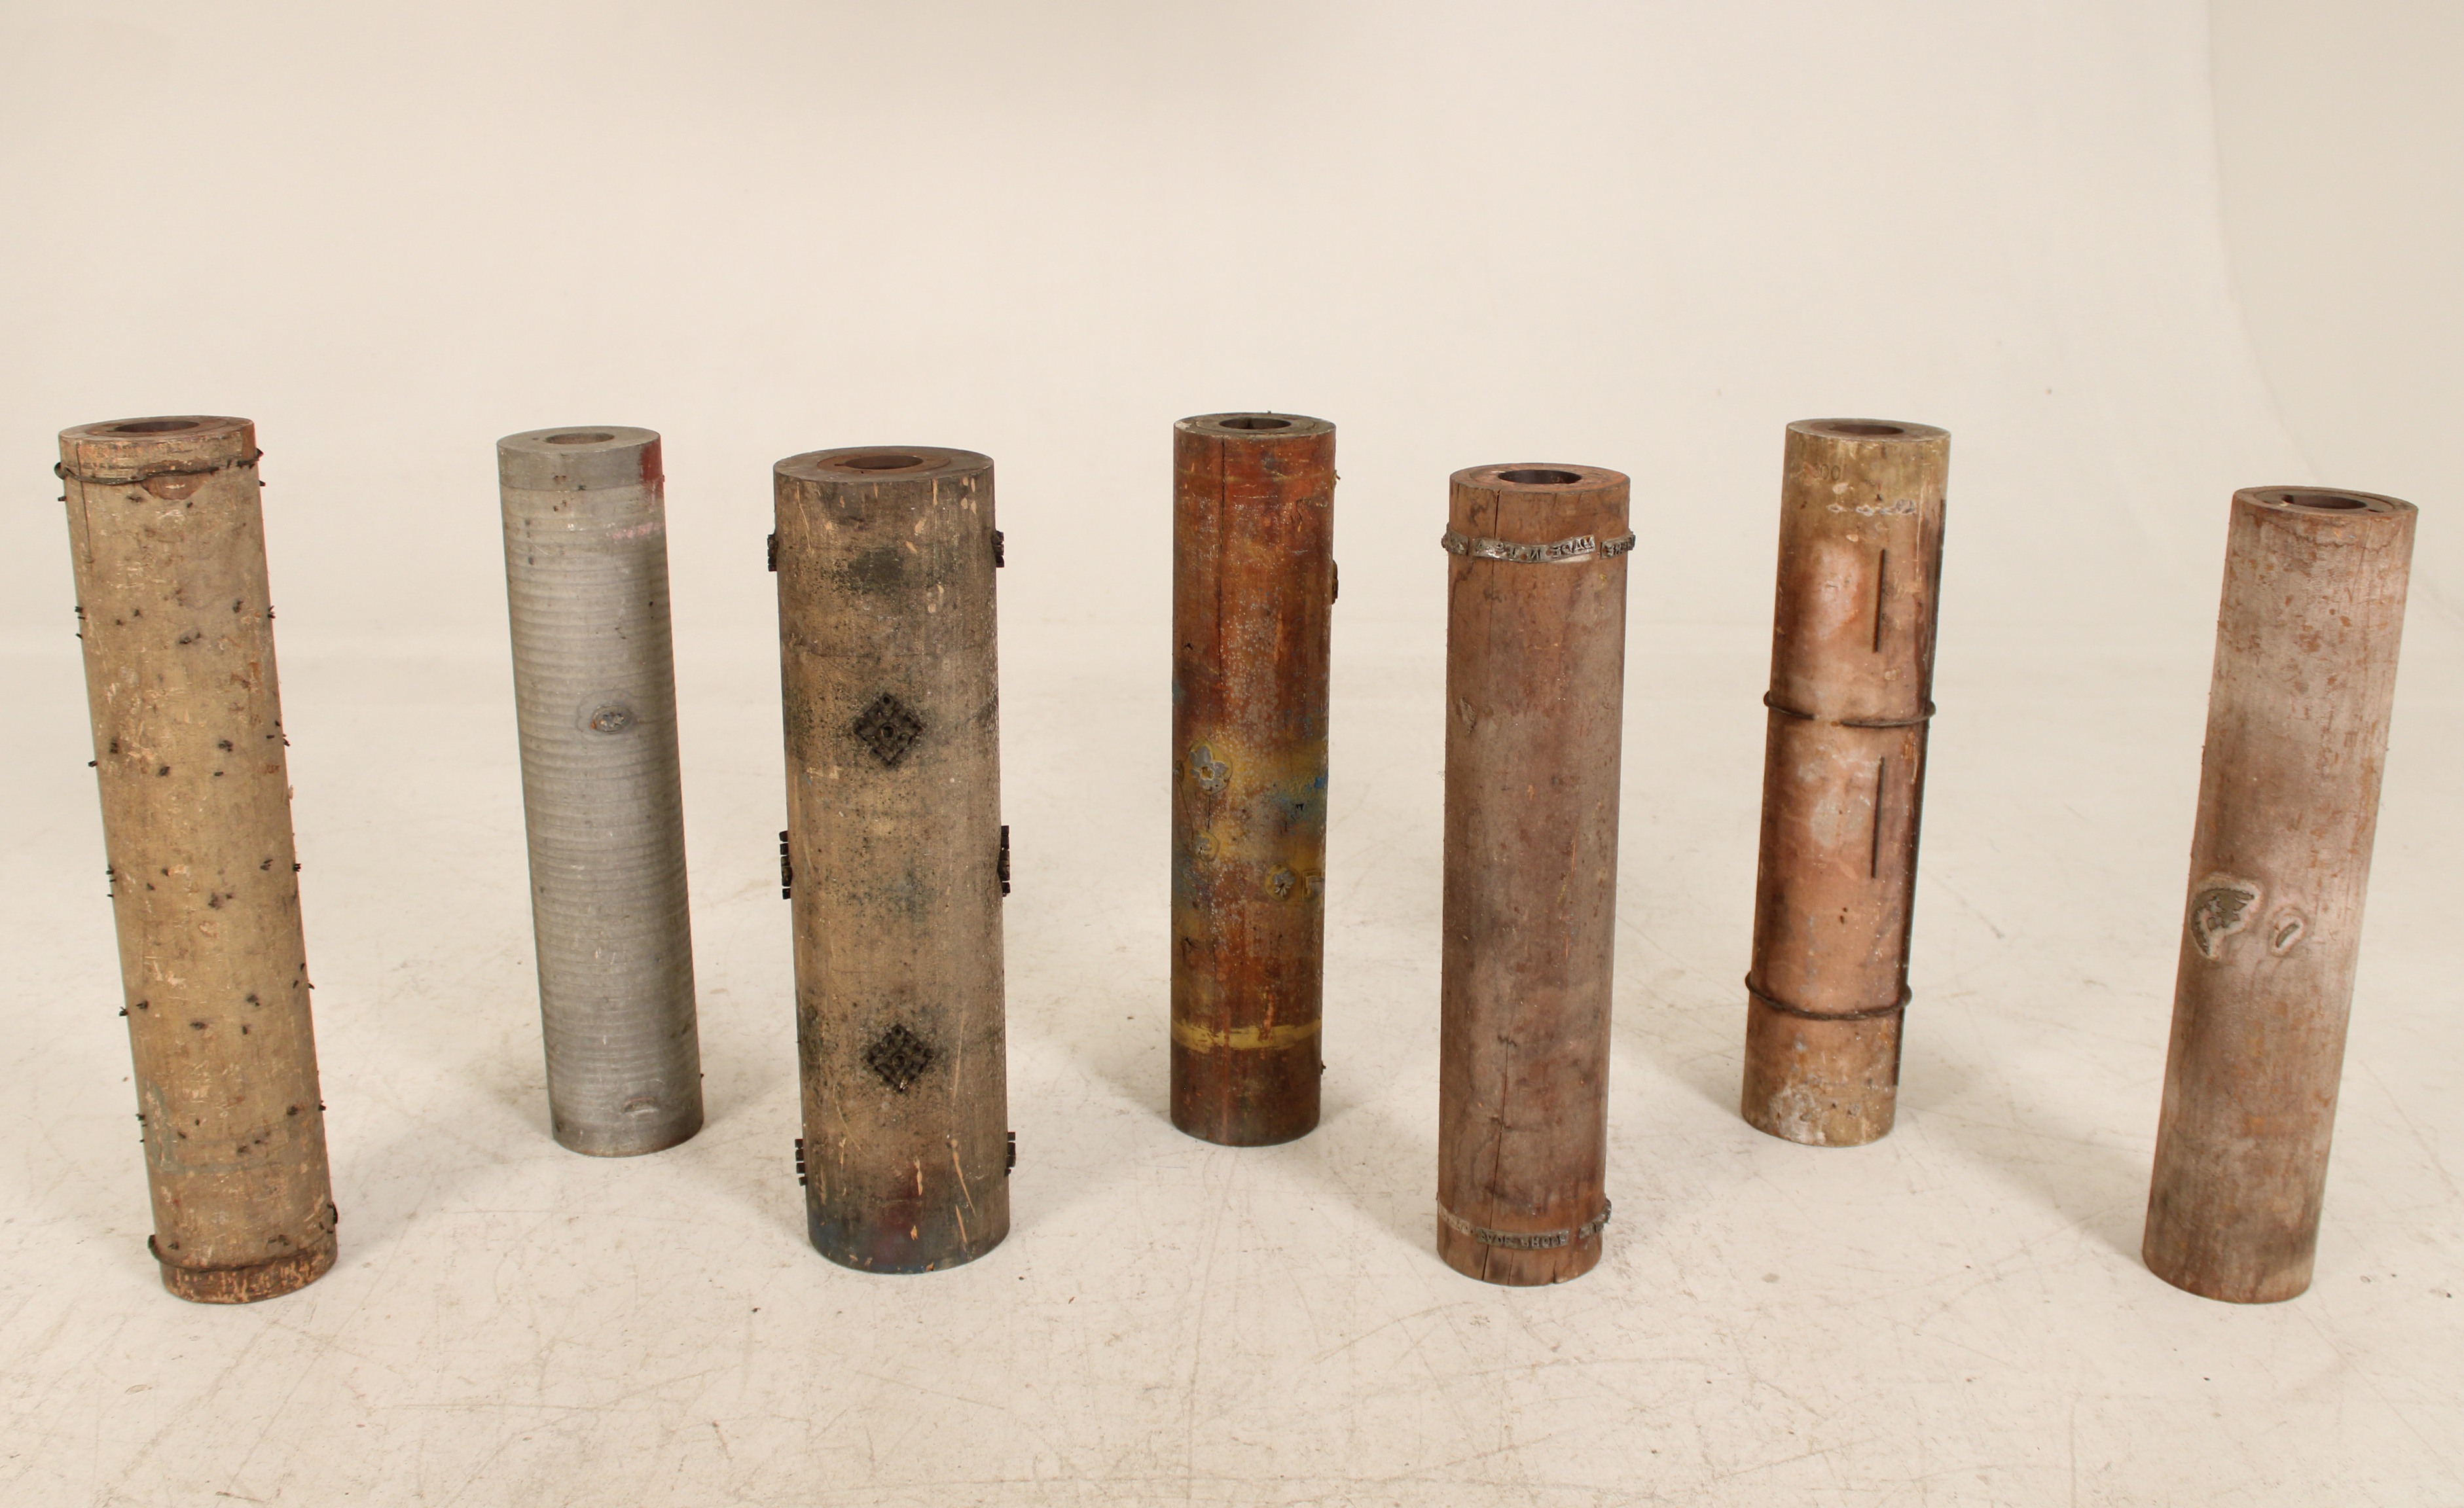 GROUP OF 7 WOODEN WALLPAPER ROLLERS 35ecb0